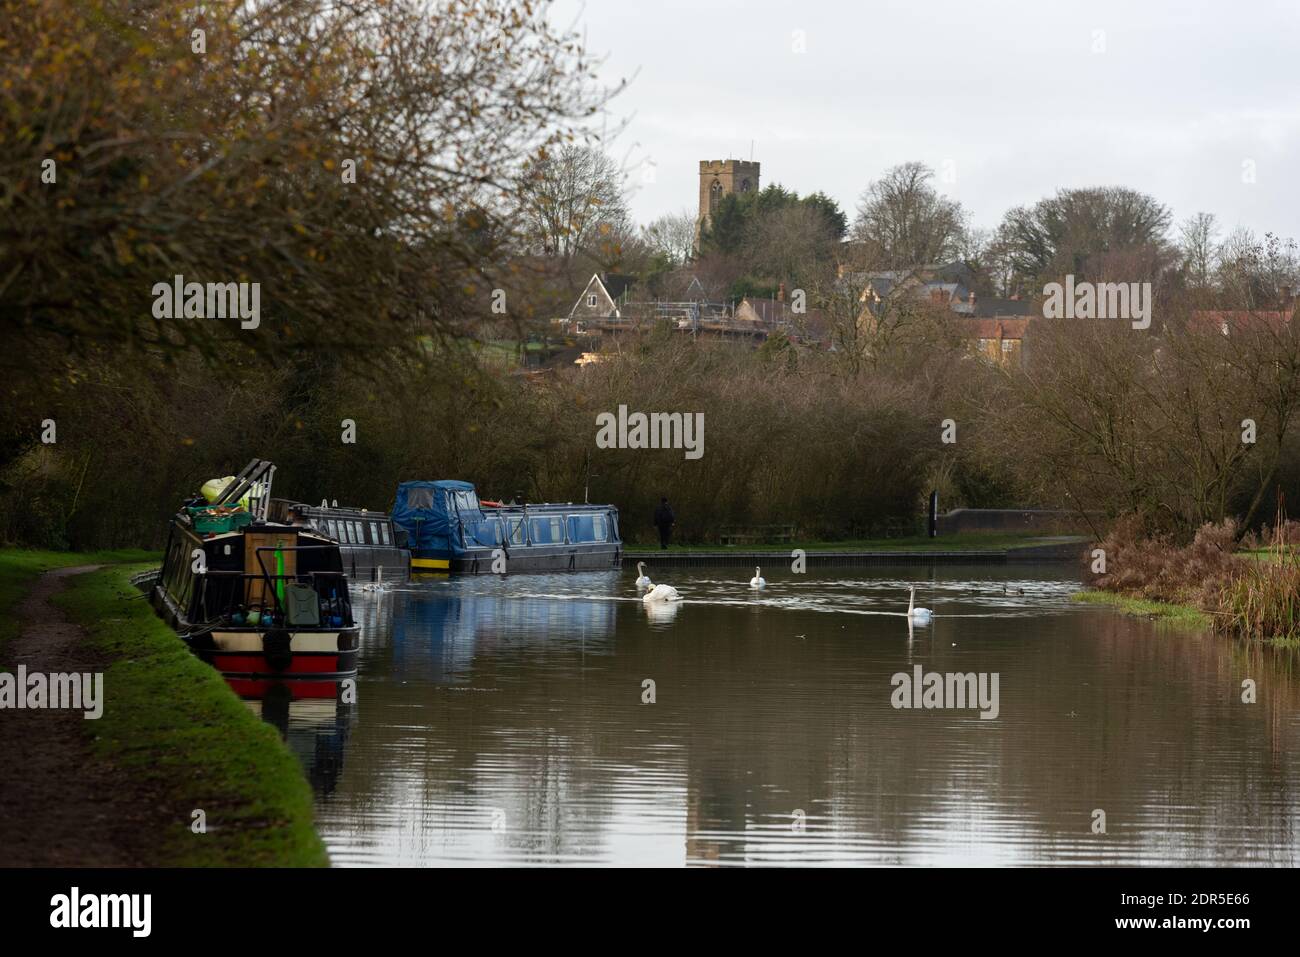 canal stbuenes northampton scene with canal boats moored round bend with church in background Stock Photo